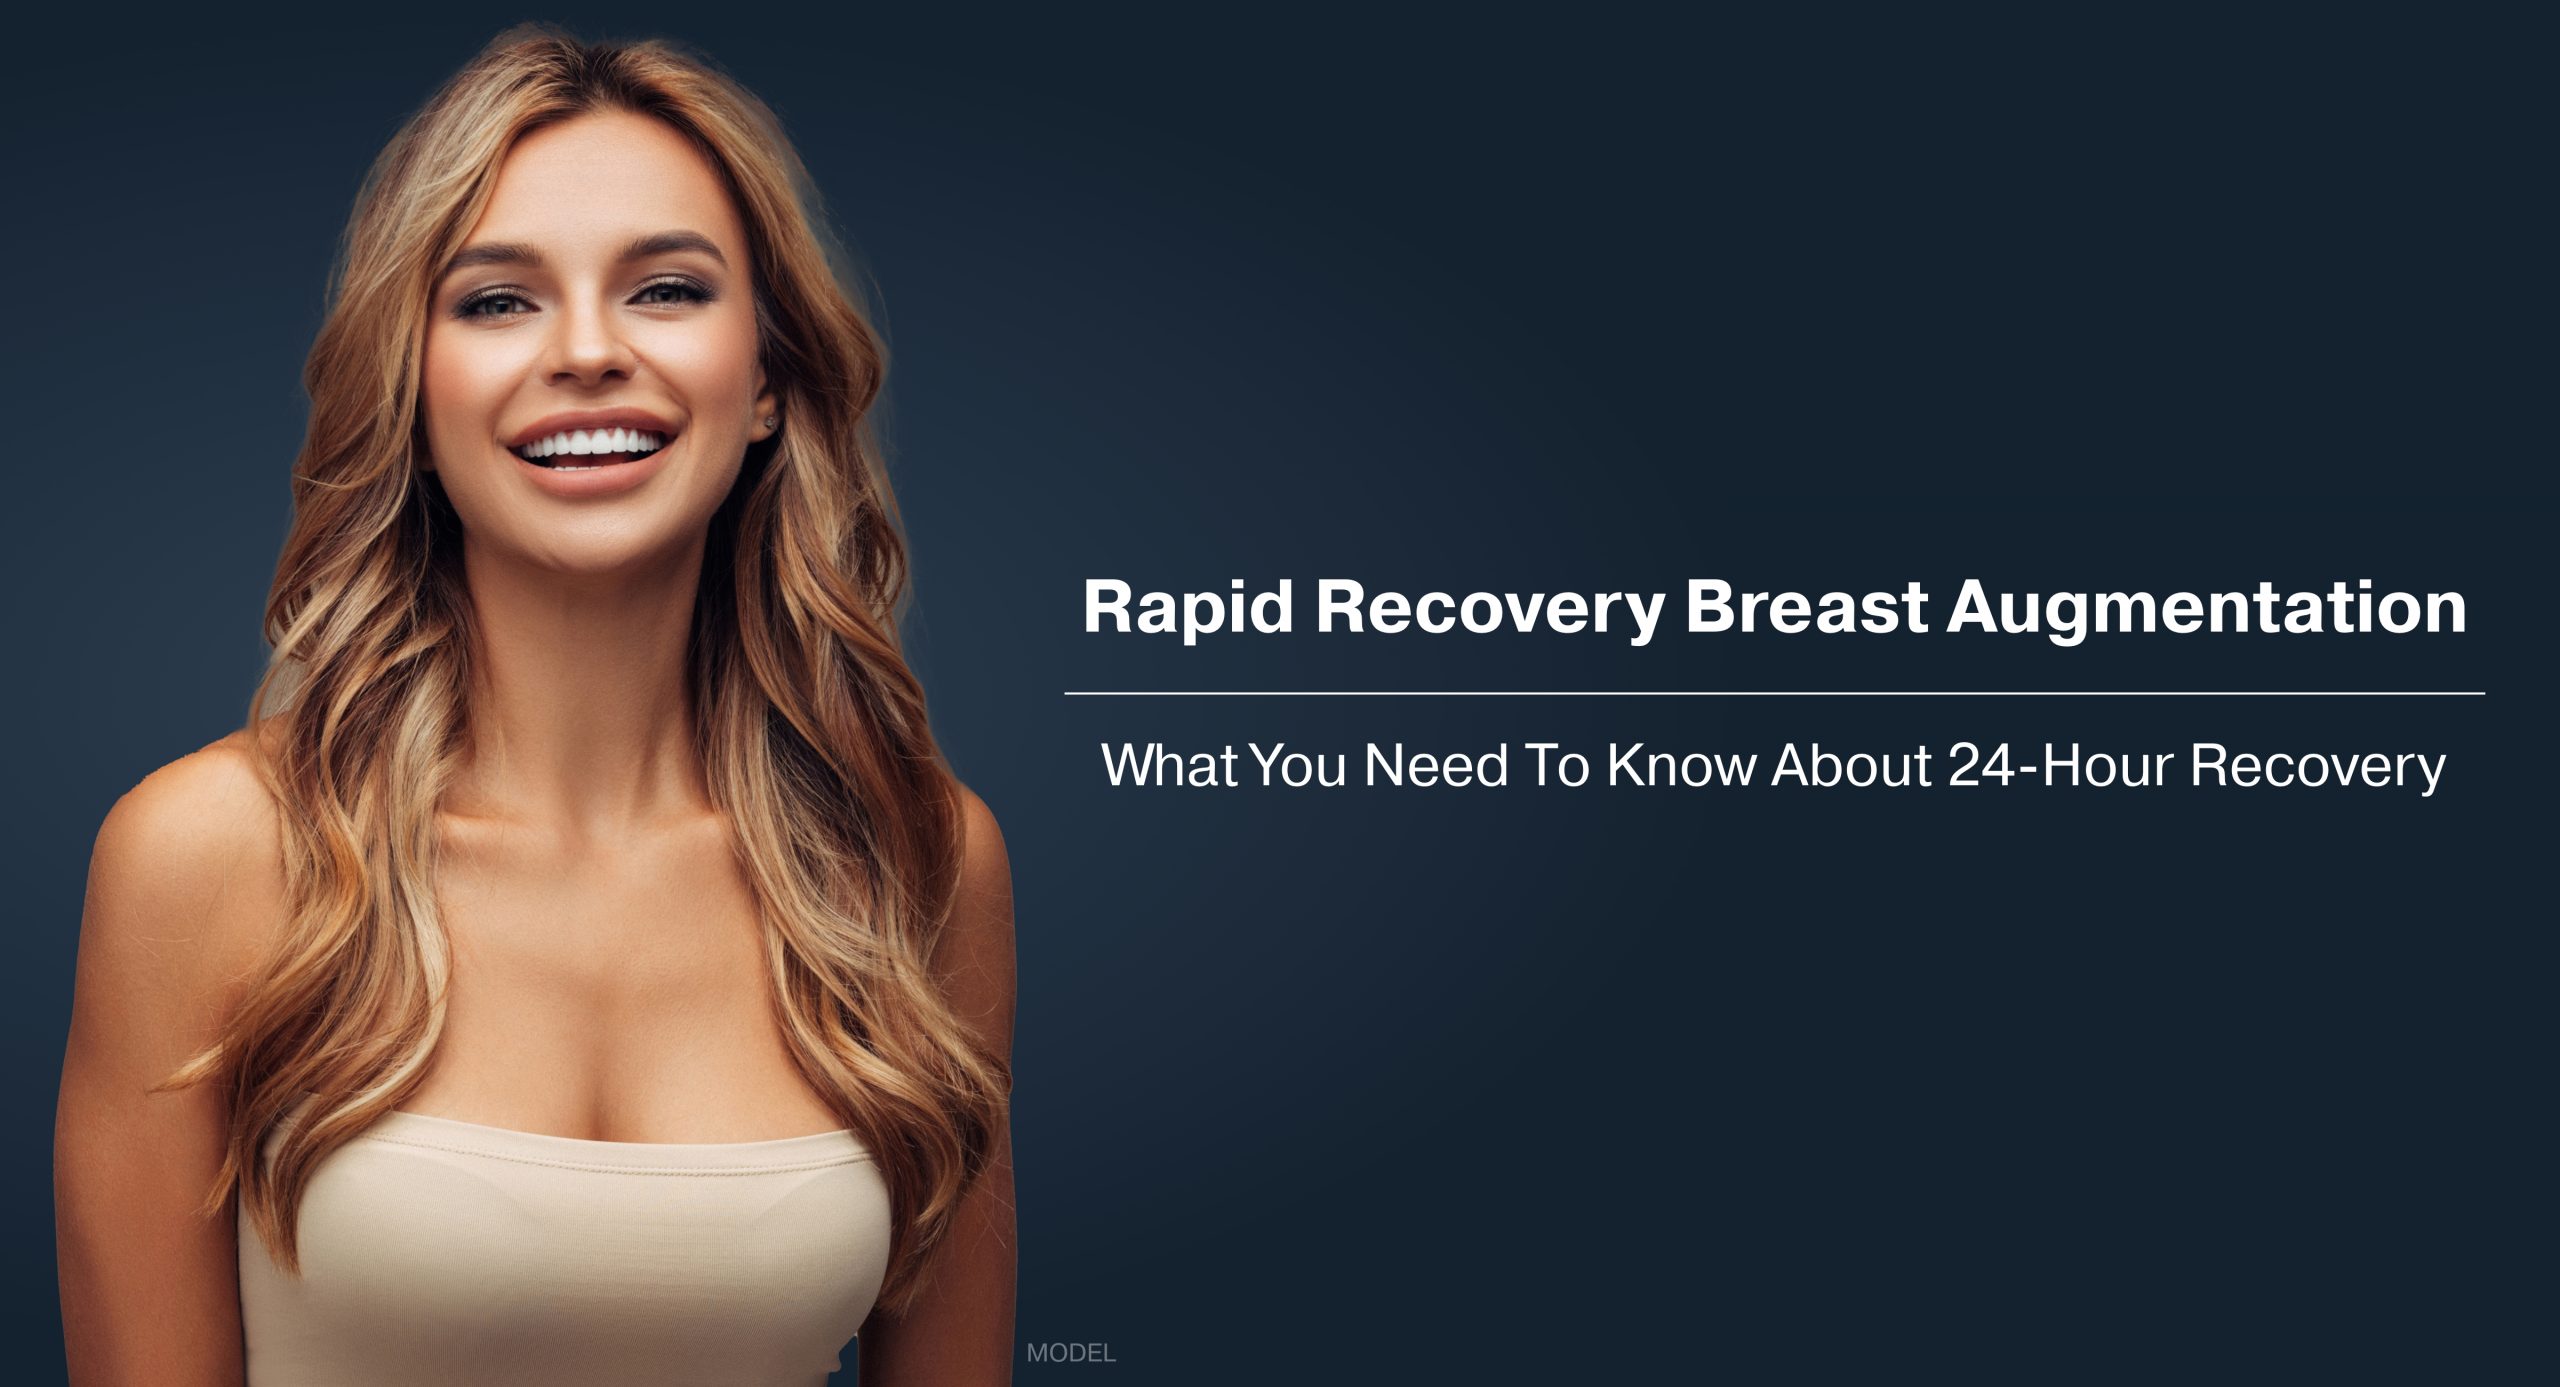 Quick Recovery Breast Augmentation, 24 Hour Augment